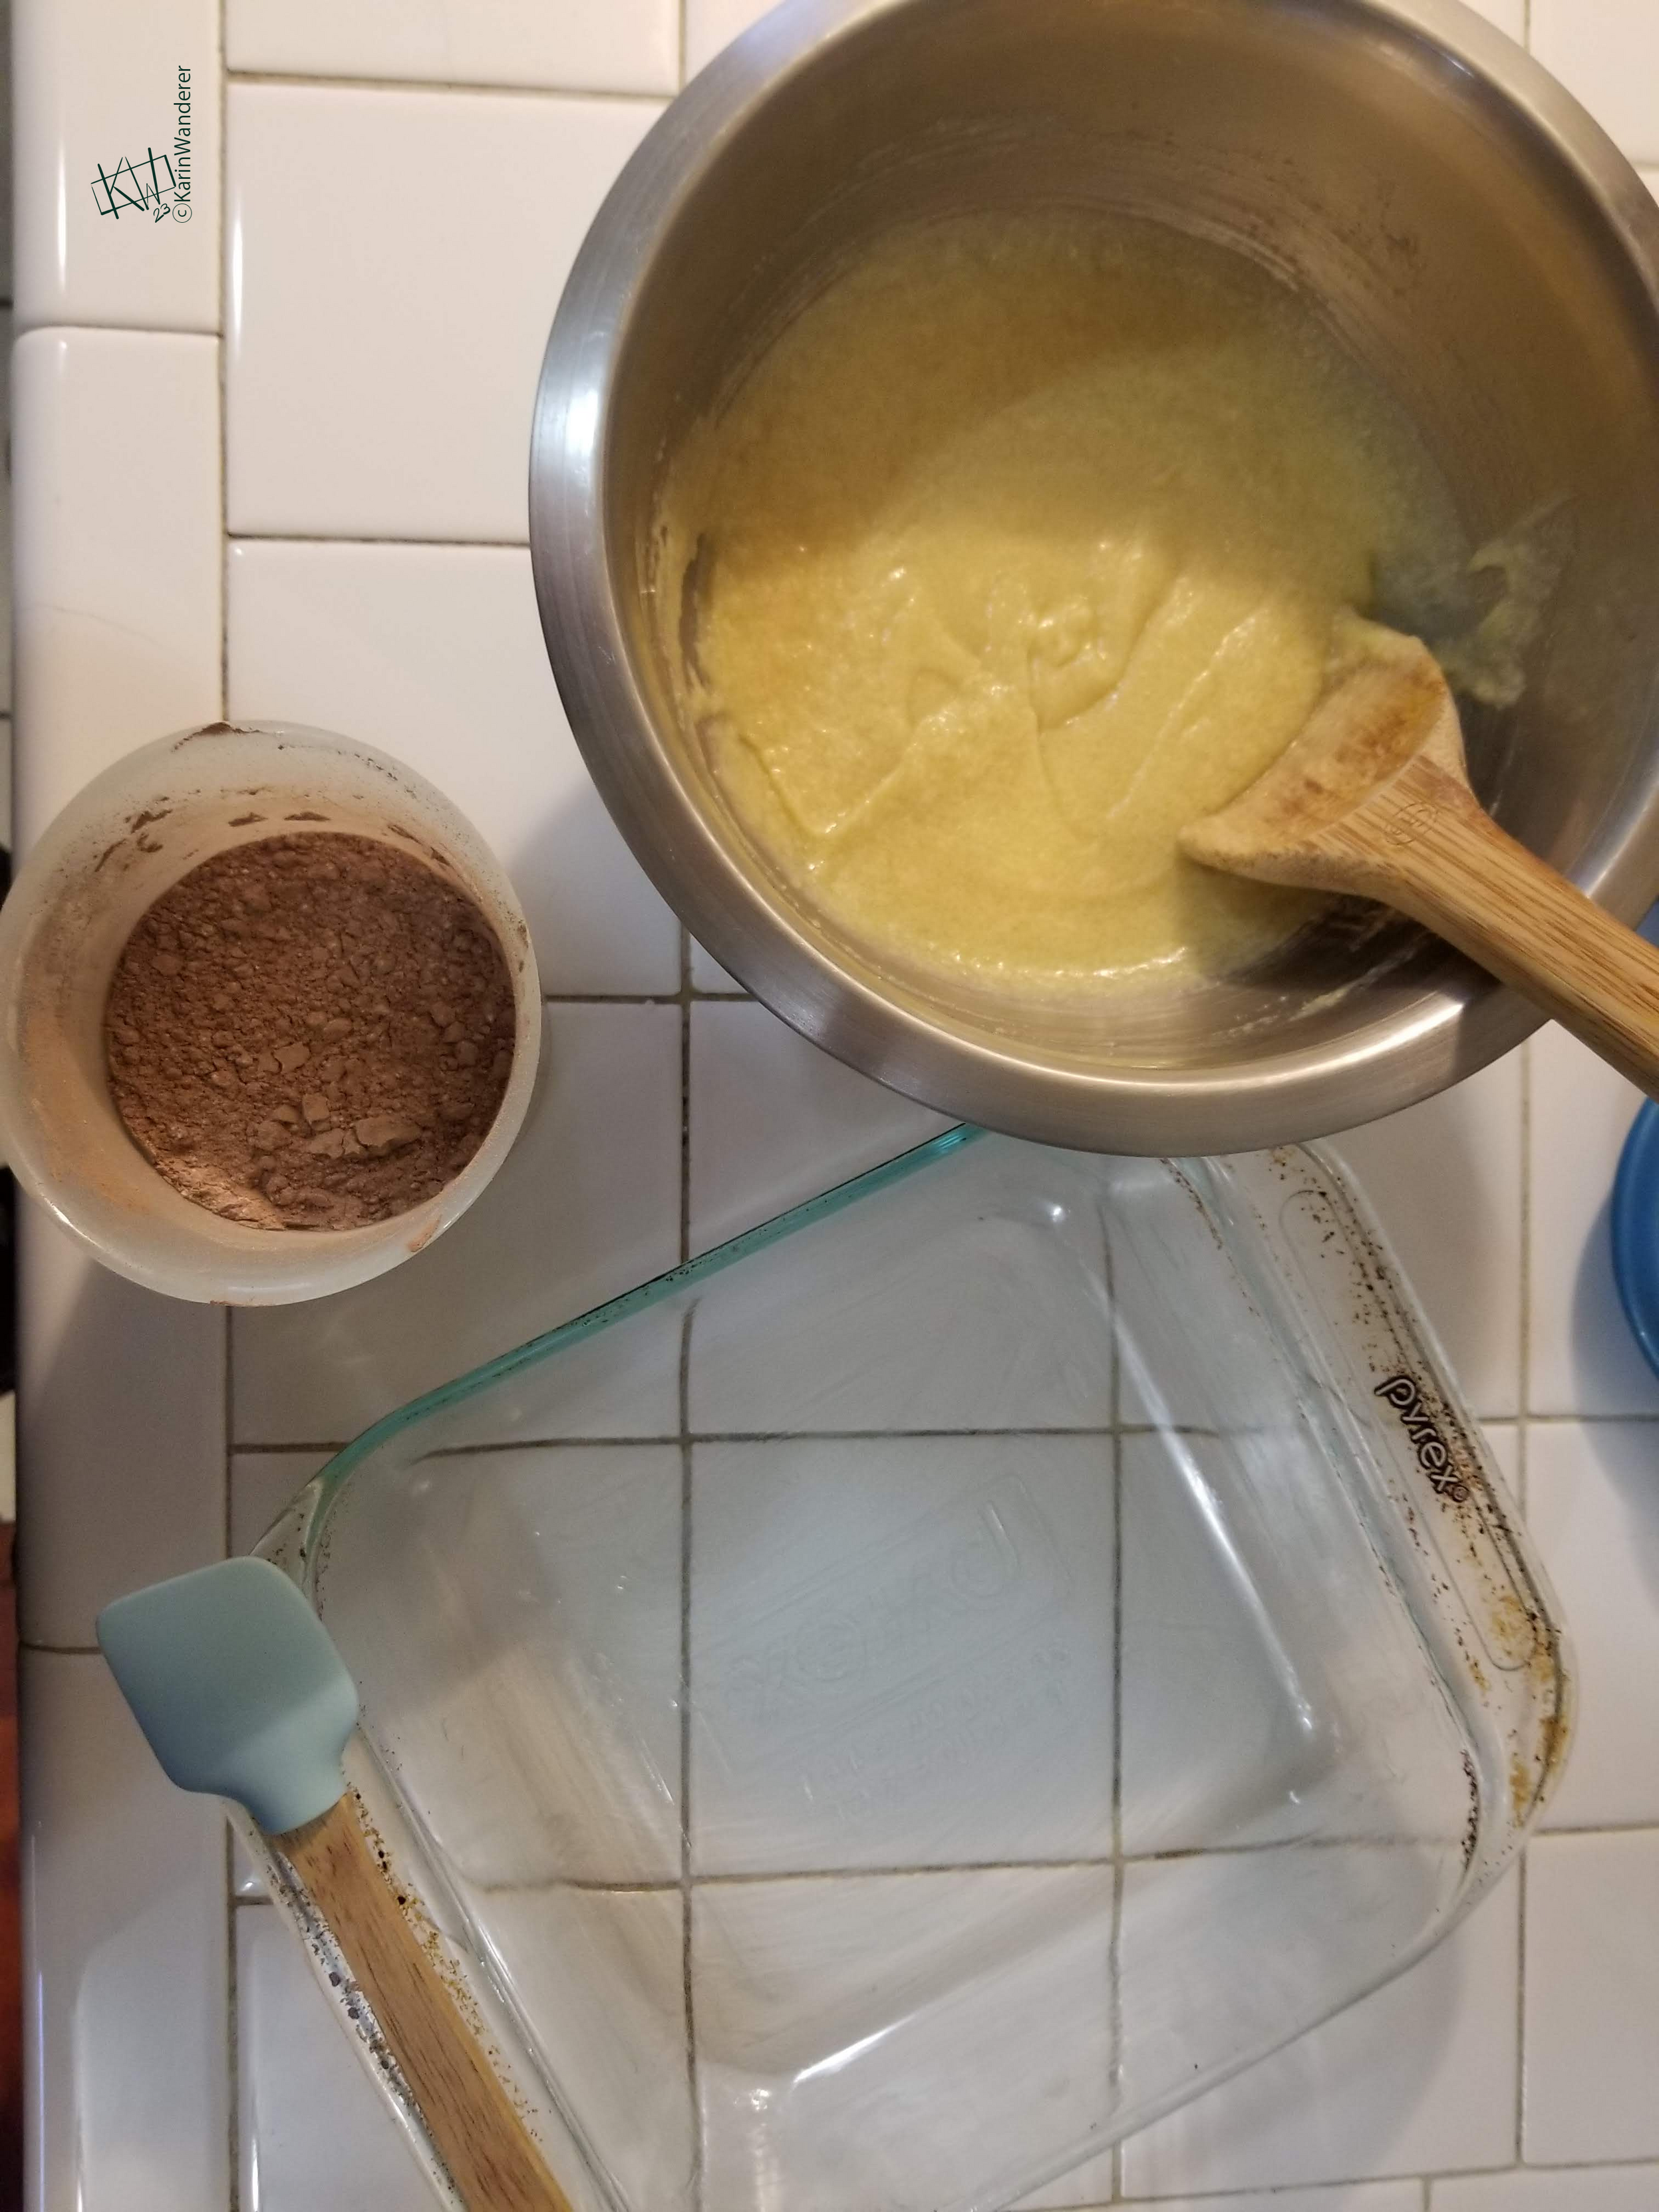 Photo of a bowl with the wet ingredients for brownies & a cup with the dry ingredients. A square glass baking dish & rubber spatula wait next to them.